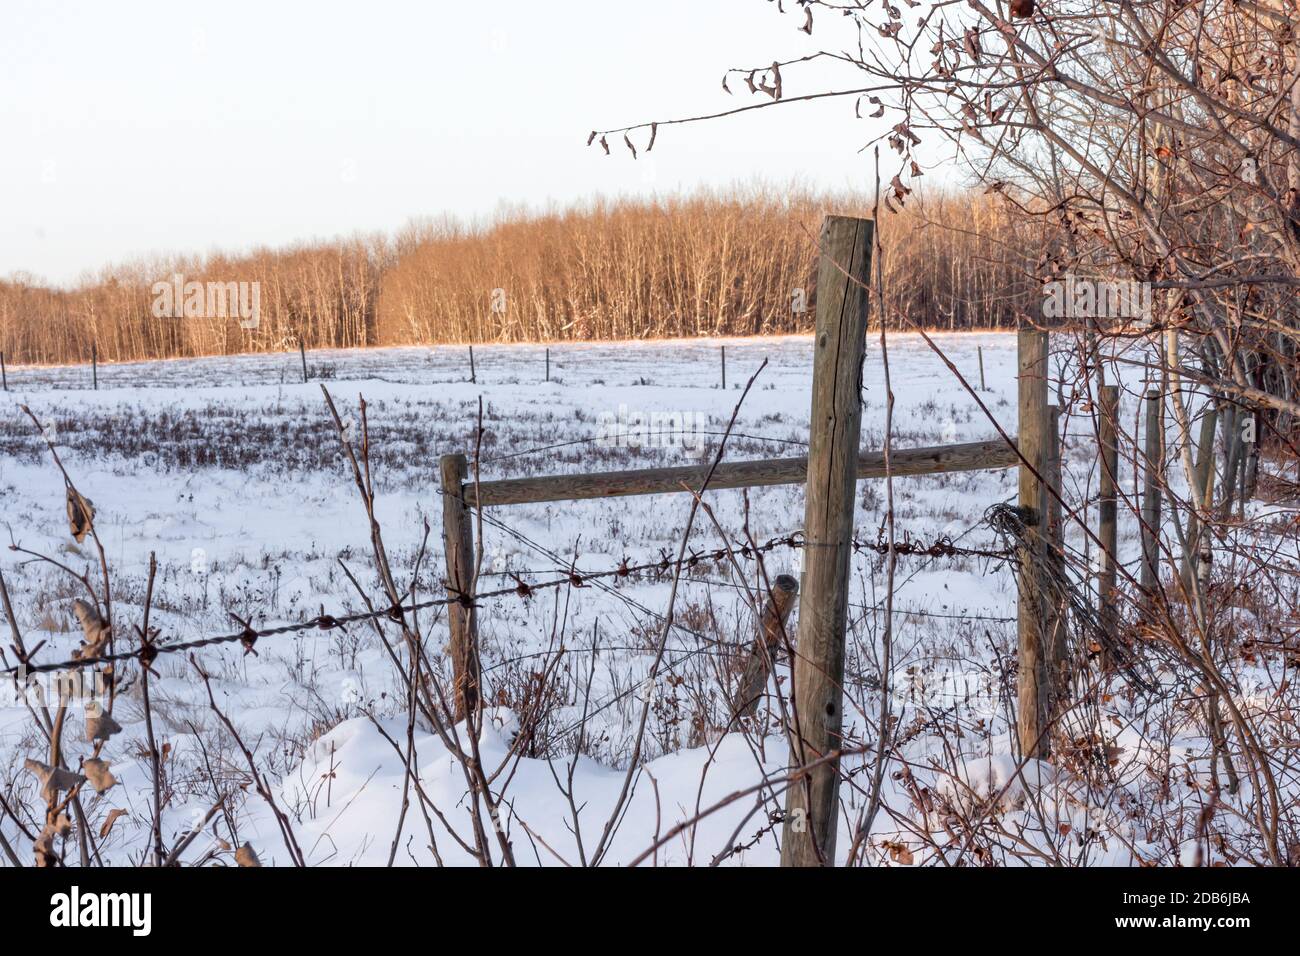 Winter farm field with fence line and trees, snow on ground Stock Photo